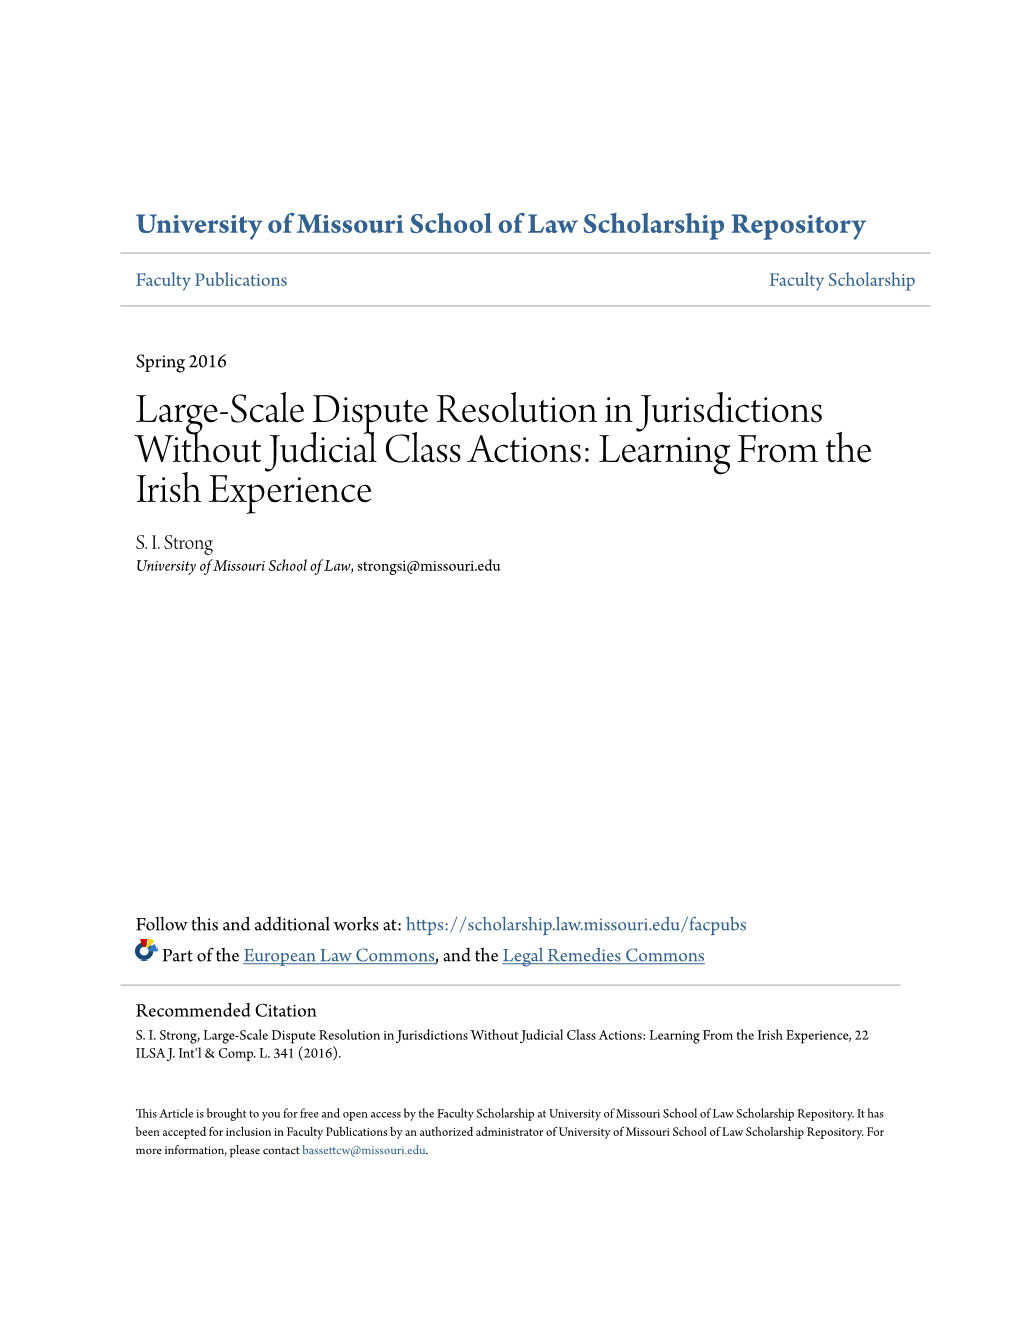 Large-Scale Dispute Resolution in Jurisdictions Without Judicial Class Actions: Learning from the Irish Experience S